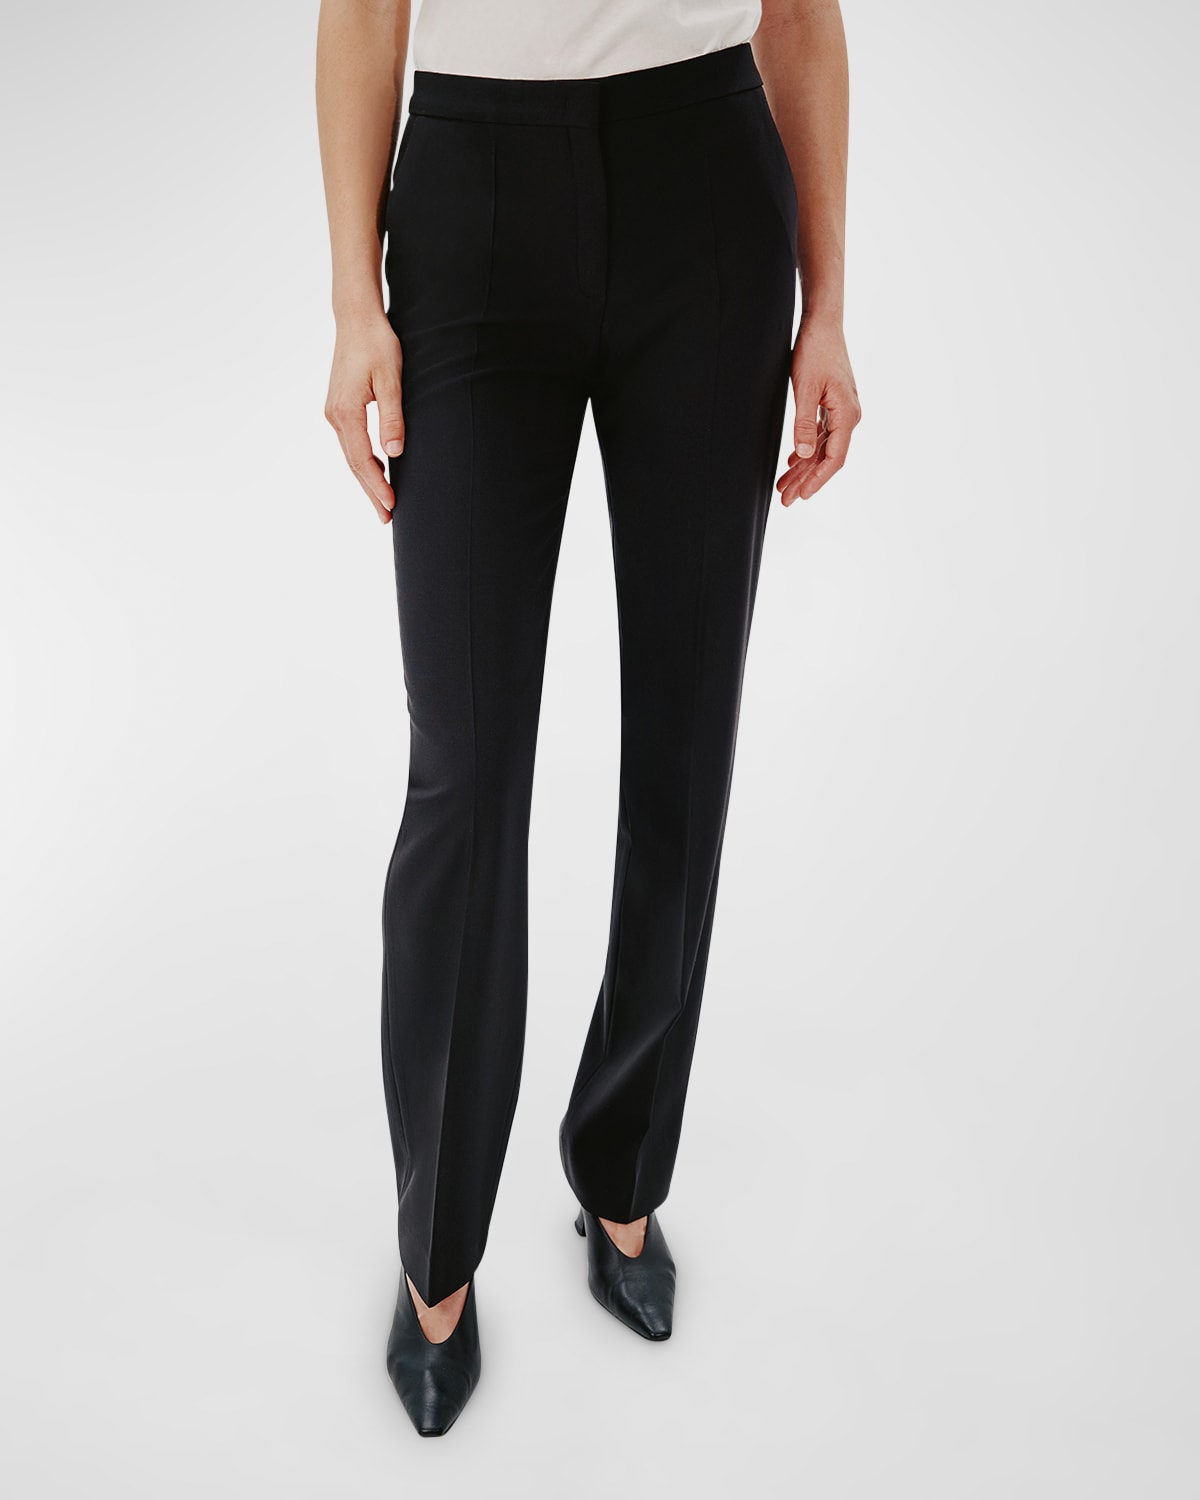 Another Tomorrow Merino Wool Classic Trousers In Black